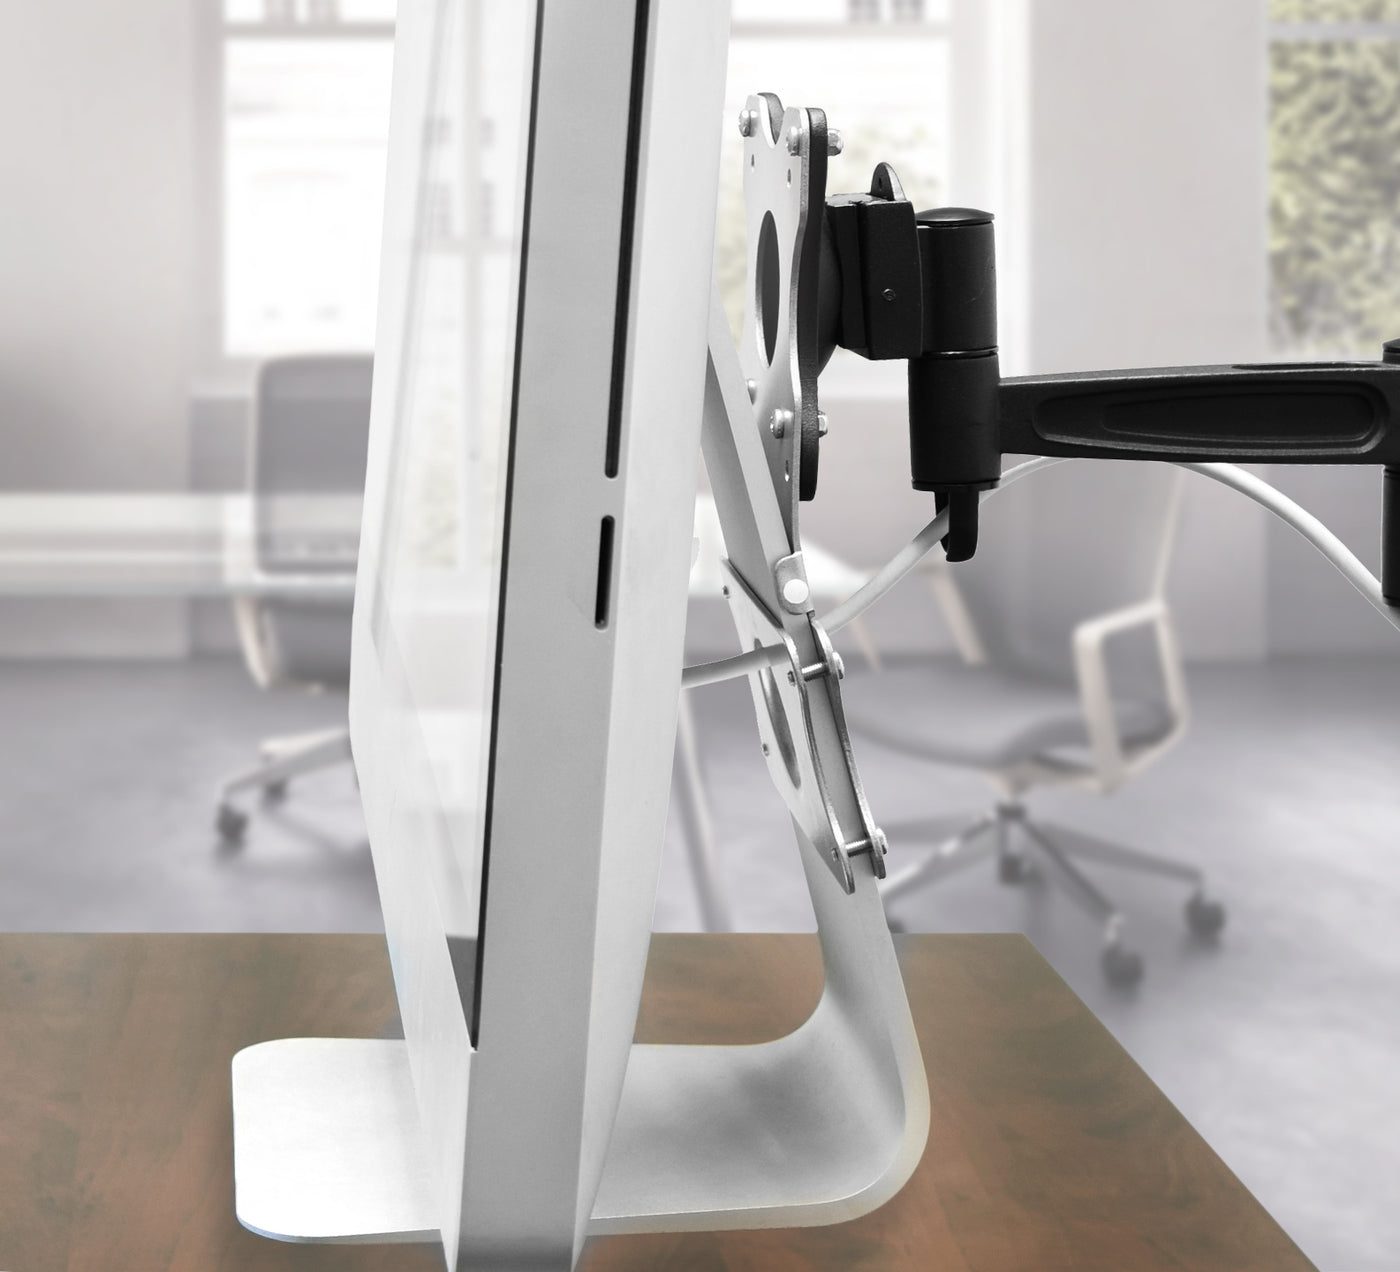 Elevate your iMac to new ergonomic levels for more productive workdays.